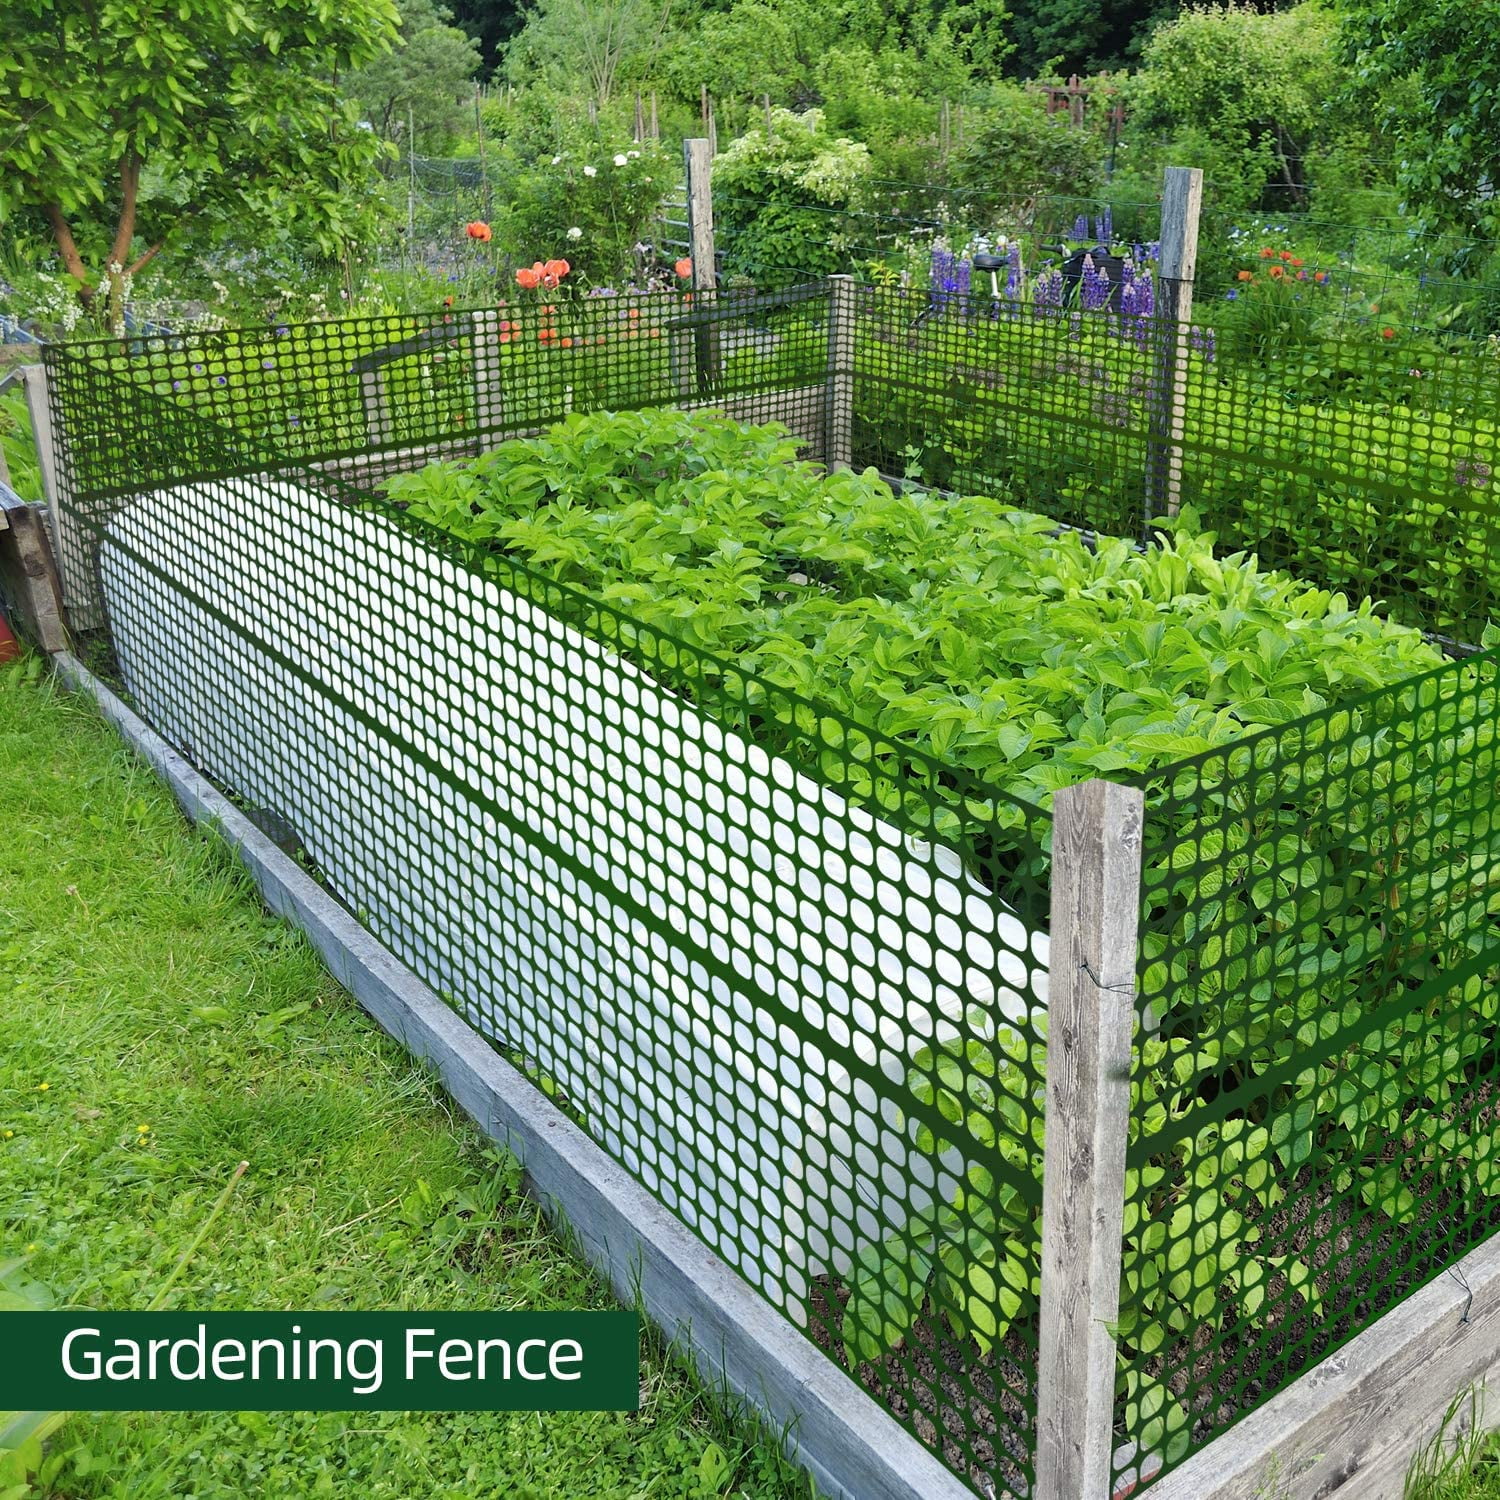 Poultry Swimming Pool Safety Heavy Netting Deer Tgzwme Garden Fence Plastic Kit with Stakes and Zip Ties Mesh Temporary Fence for Gardening 4x100 Feet Garden Netting & 25x4 Feet Stakes 